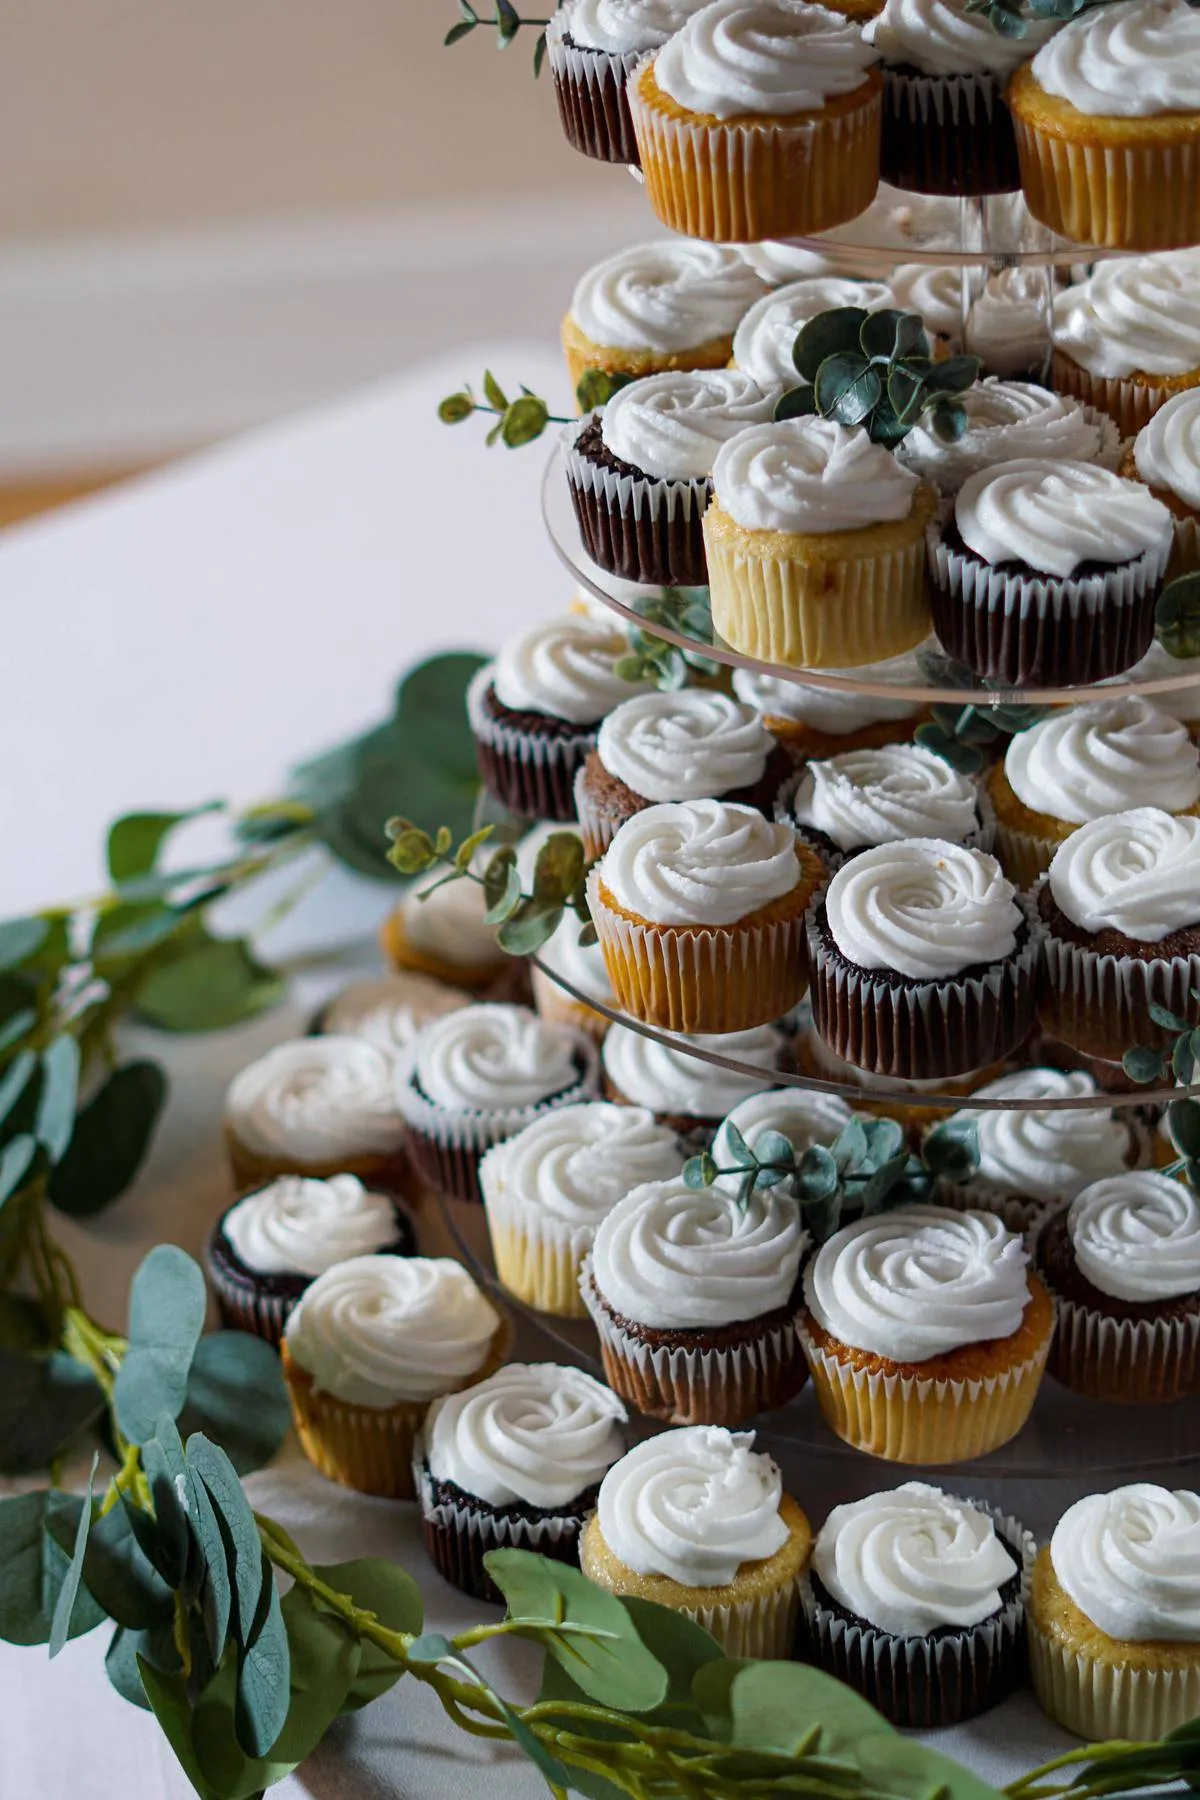 Tower of cupcakes at a wedding dessert table